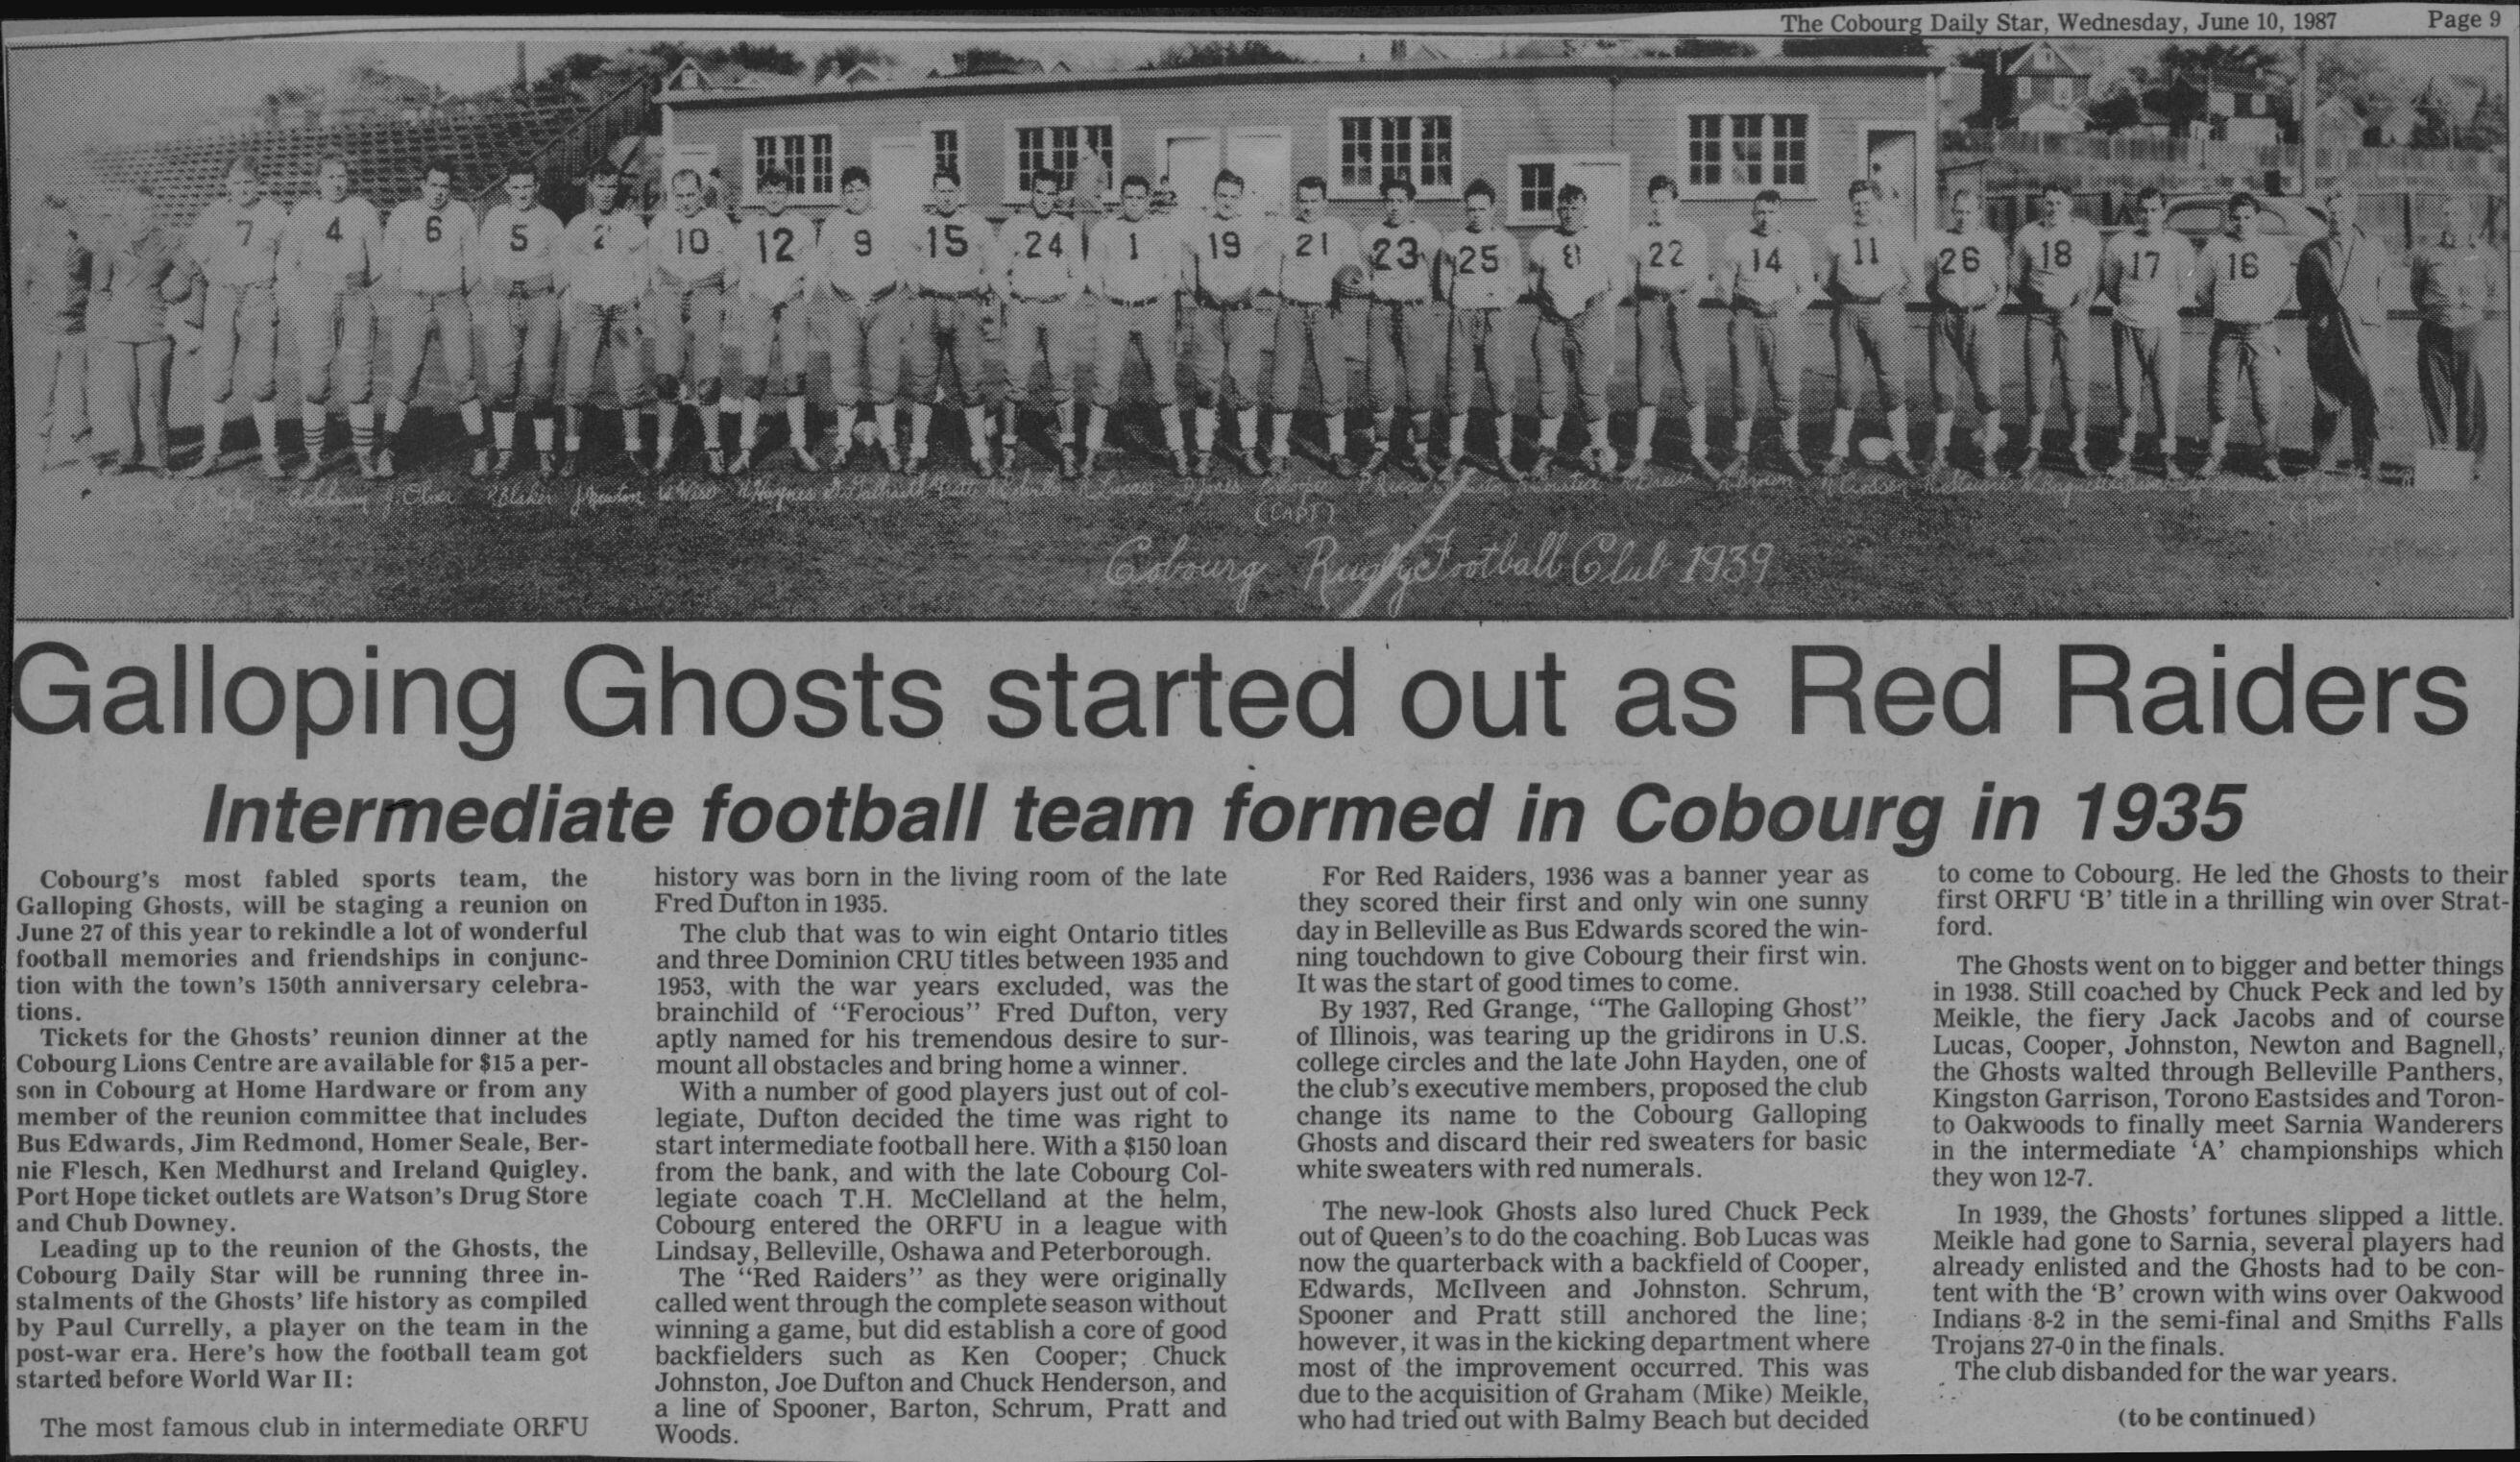 Football -Galloping Ghosts -1987 -A08-reunion